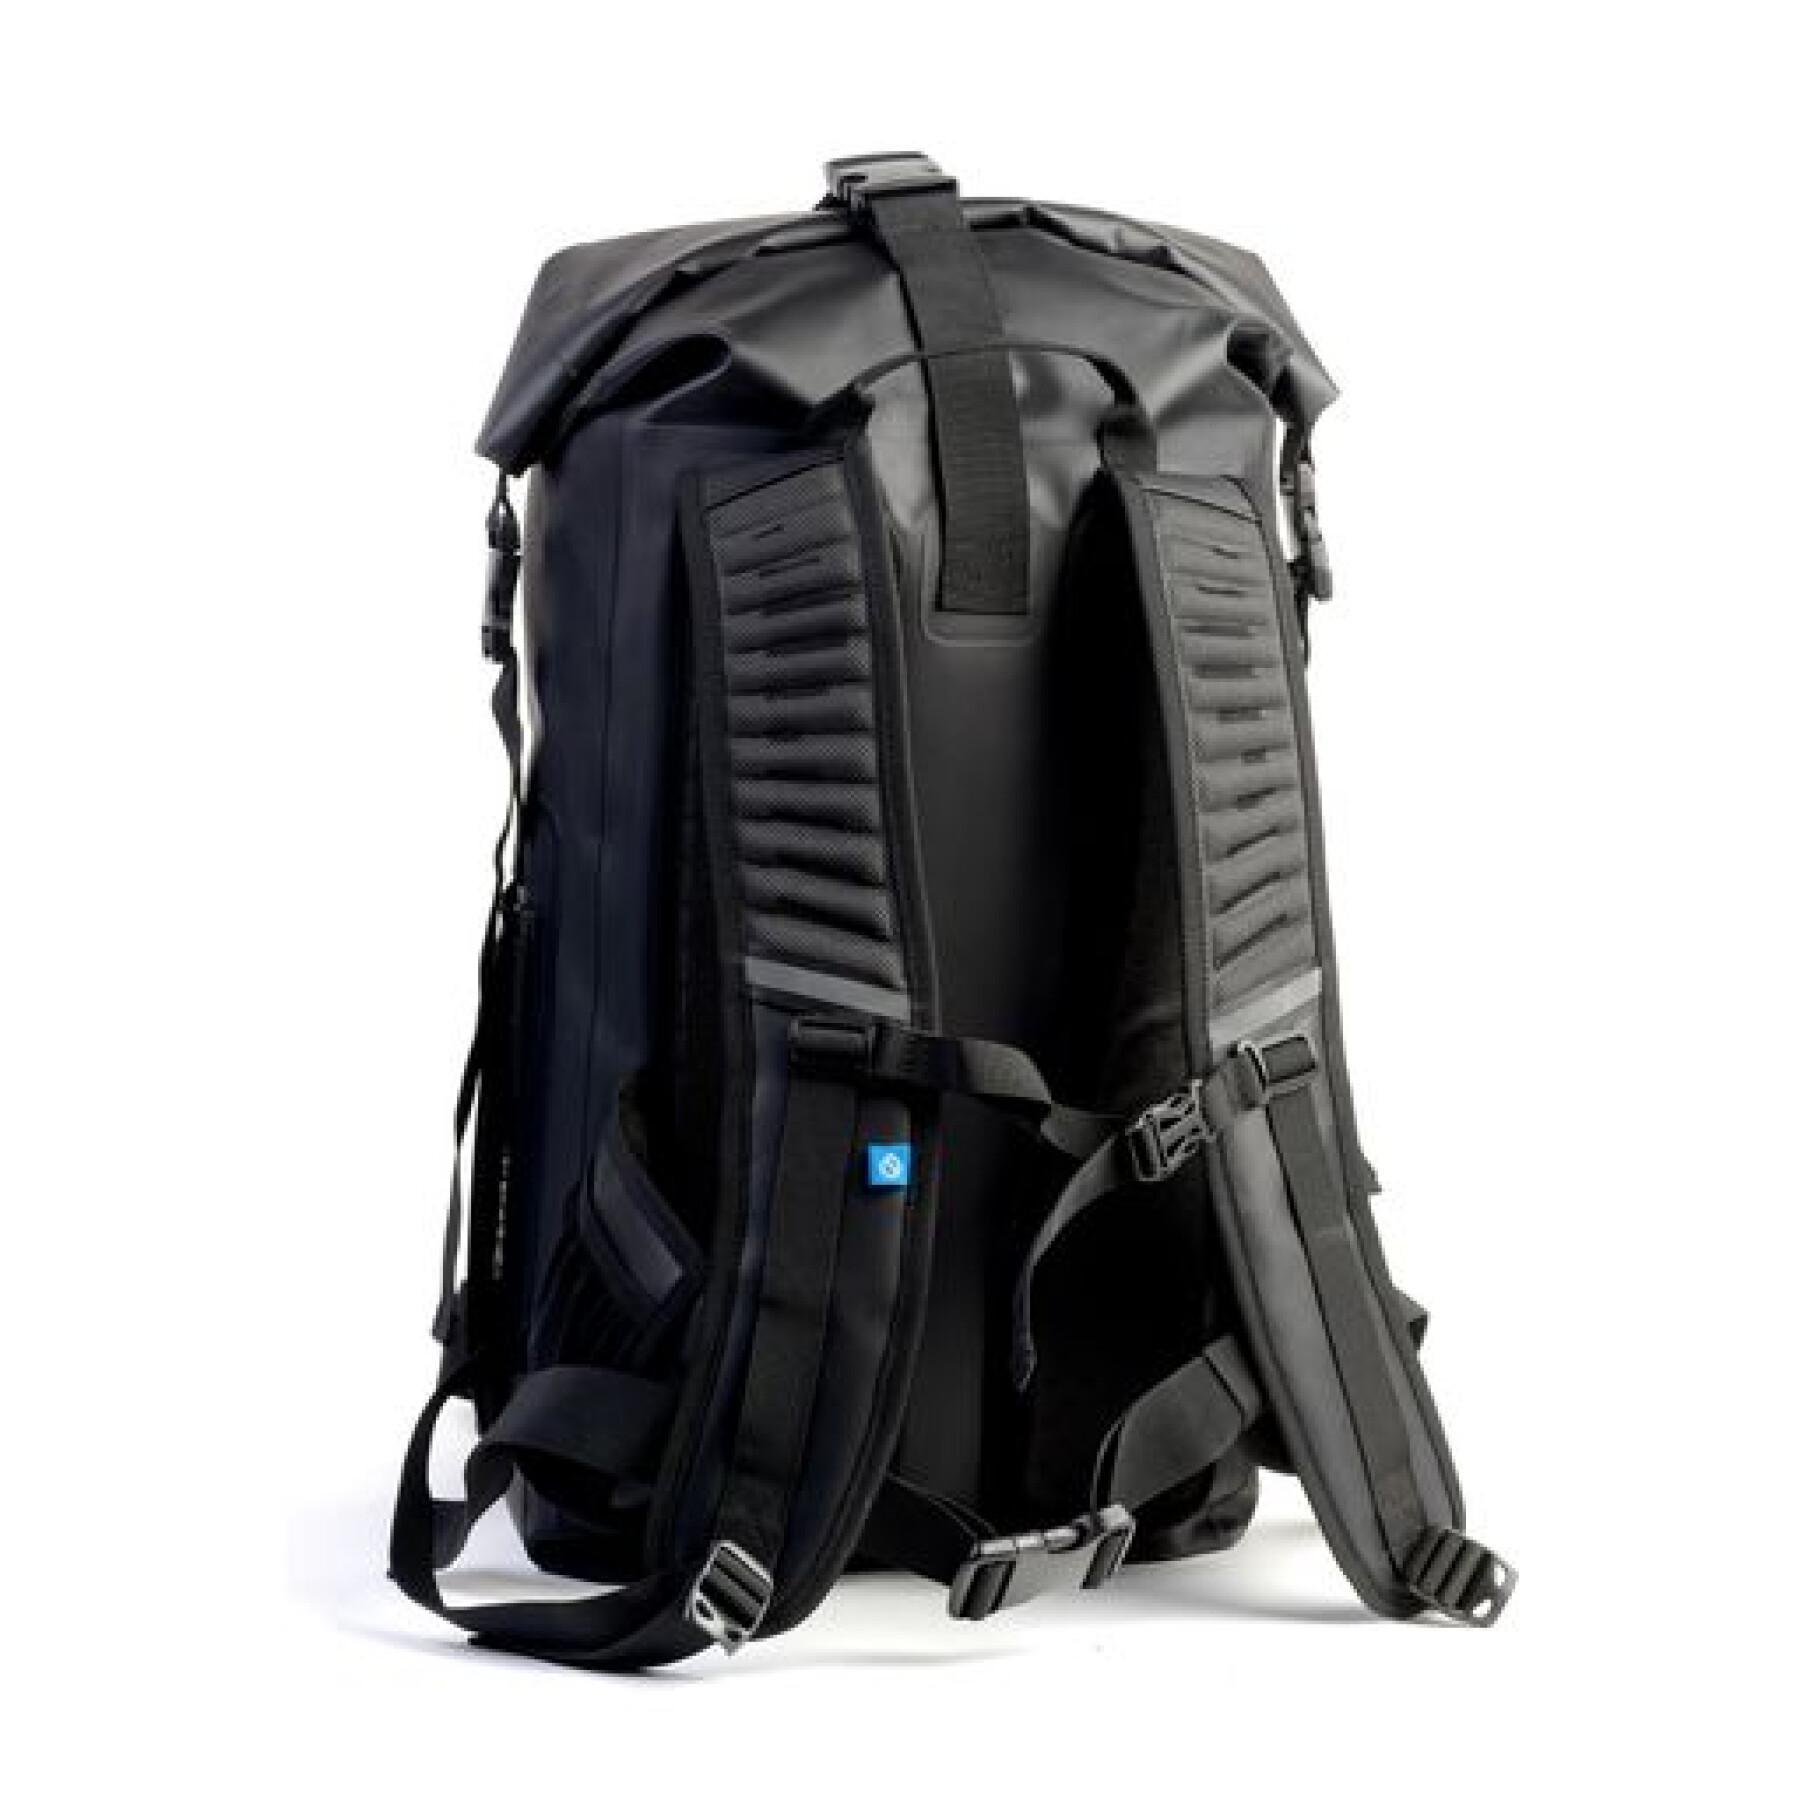 Waterproof backpack Surflogic Expedition-dry